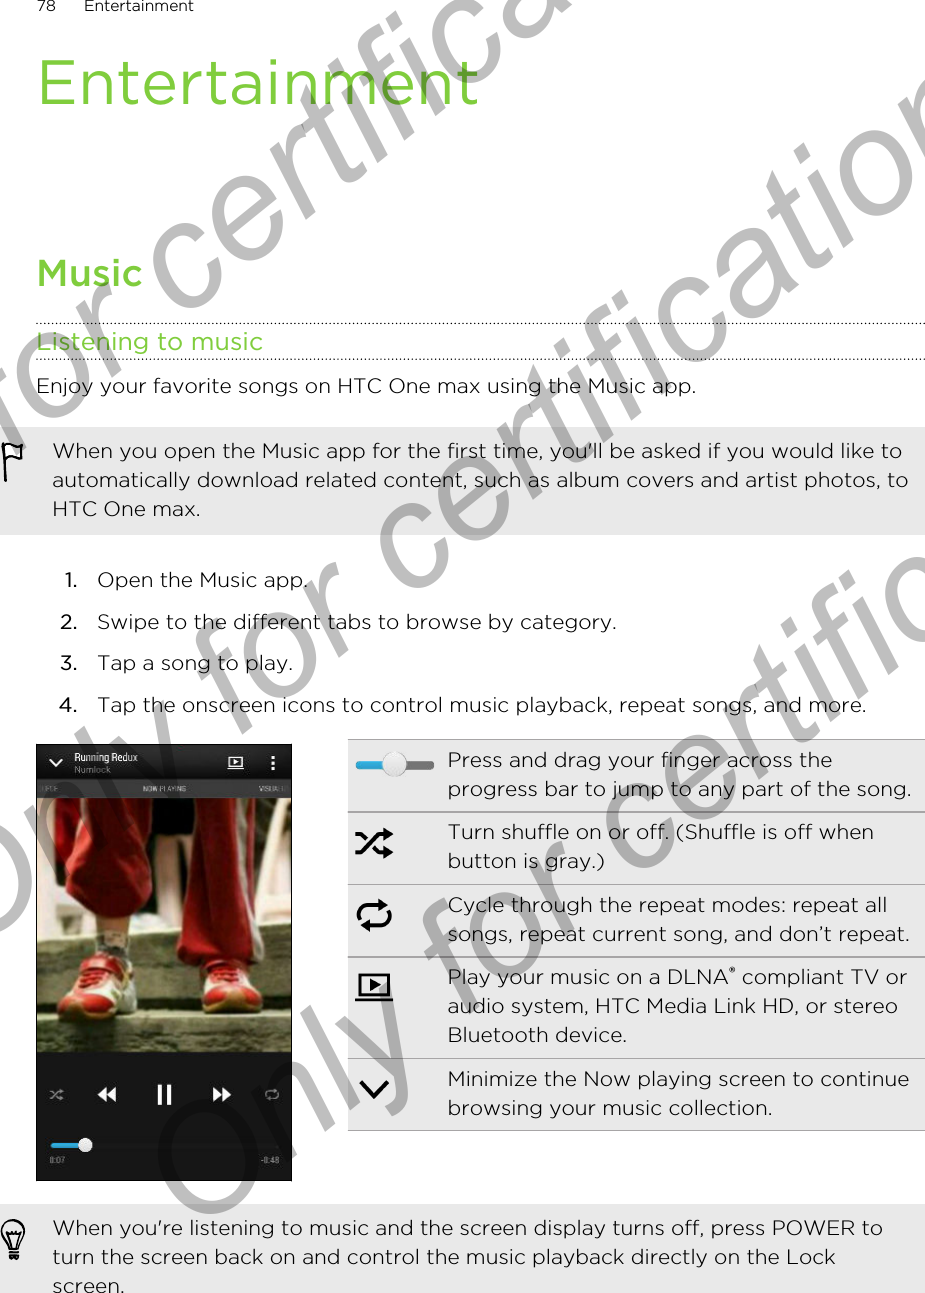 EntertainmentMusicListening to musicEnjoy your favorite songs on HTC One max using the Music app.When you open the Music app for the first time, you&apos;ll be asked if you would like toautomatically download related content, such as album covers and artist photos, toHTC One max.1. Open the Music app.2. Swipe to the different tabs to browse by category.3. Tap a song to play.4. Tap the onscreen icons to control music playback, repeat songs, and more.Press and drag your finger across theprogress bar to jump to any part of the song.Turn shuffle on or off. (Shuffle is off whenbutton is gray.)Cycle through the repeat modes: repeat allsongs, repeat current song, and don’t repeat.Play your music on a DLNA® compliant TV oraudio system, HTC Media Link HD, or stereoBluetooth device.Minimize the Now playing screen to continuebrowsing your music collection.When you&apos;re listening to music and the screen display turns off, press POWER toturn the screen back on and control the music playback directly on the Lockscreen.78 EntertainmentOnly for certification  Only for certification  Only for certification